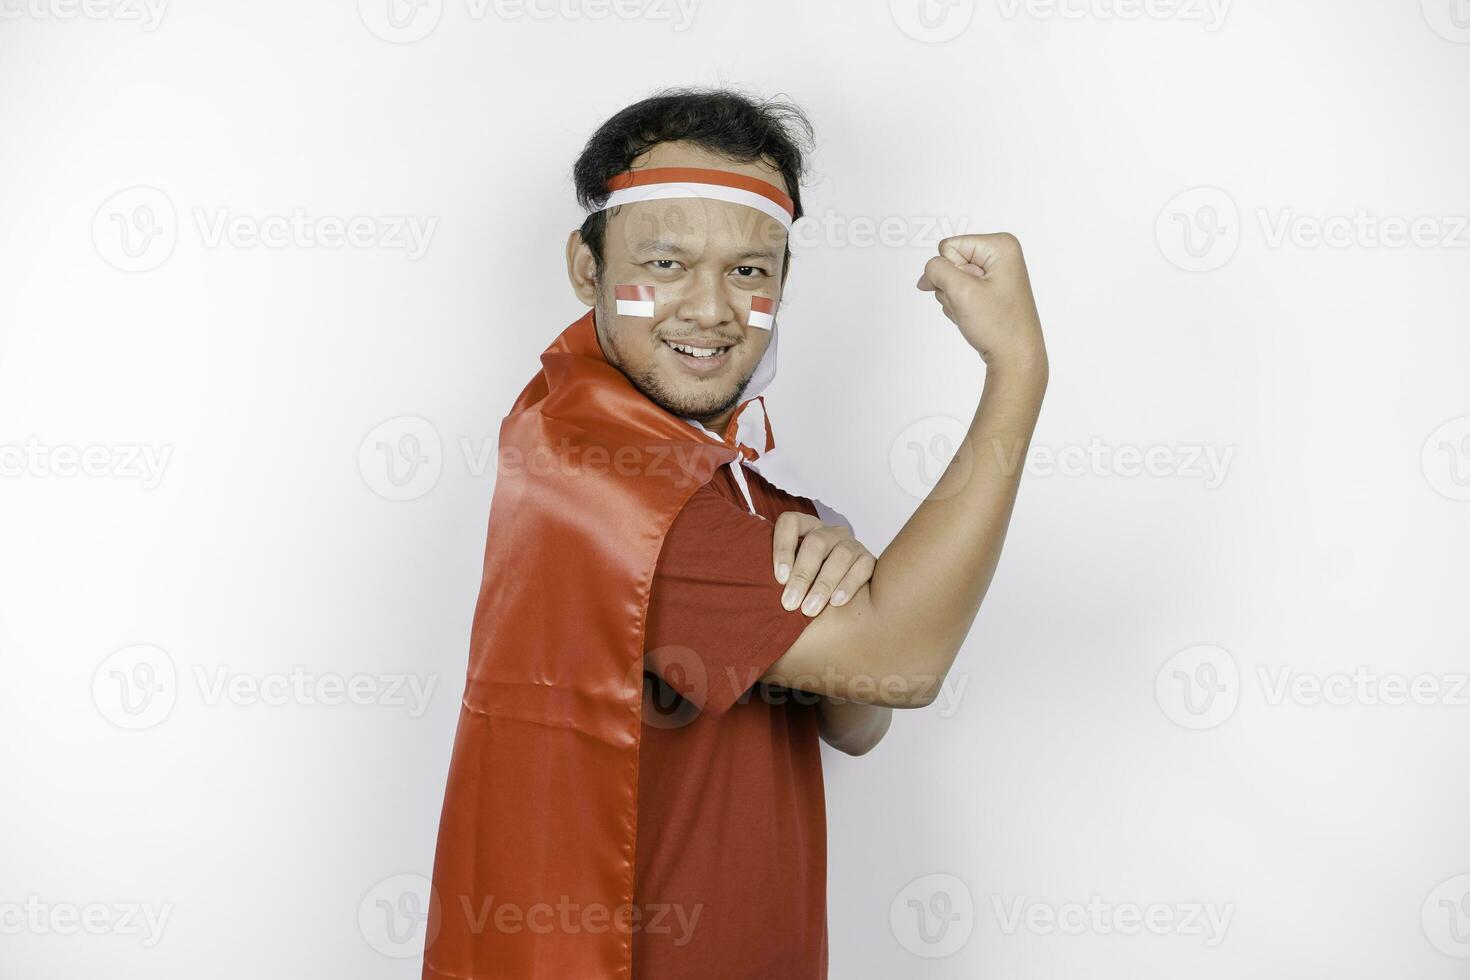 Excited Asian man wearing a red top, flag cape and headband, showing strong gesture by lifting his arms and muscles smiling proudly. Indonesia's independence day concept. photo